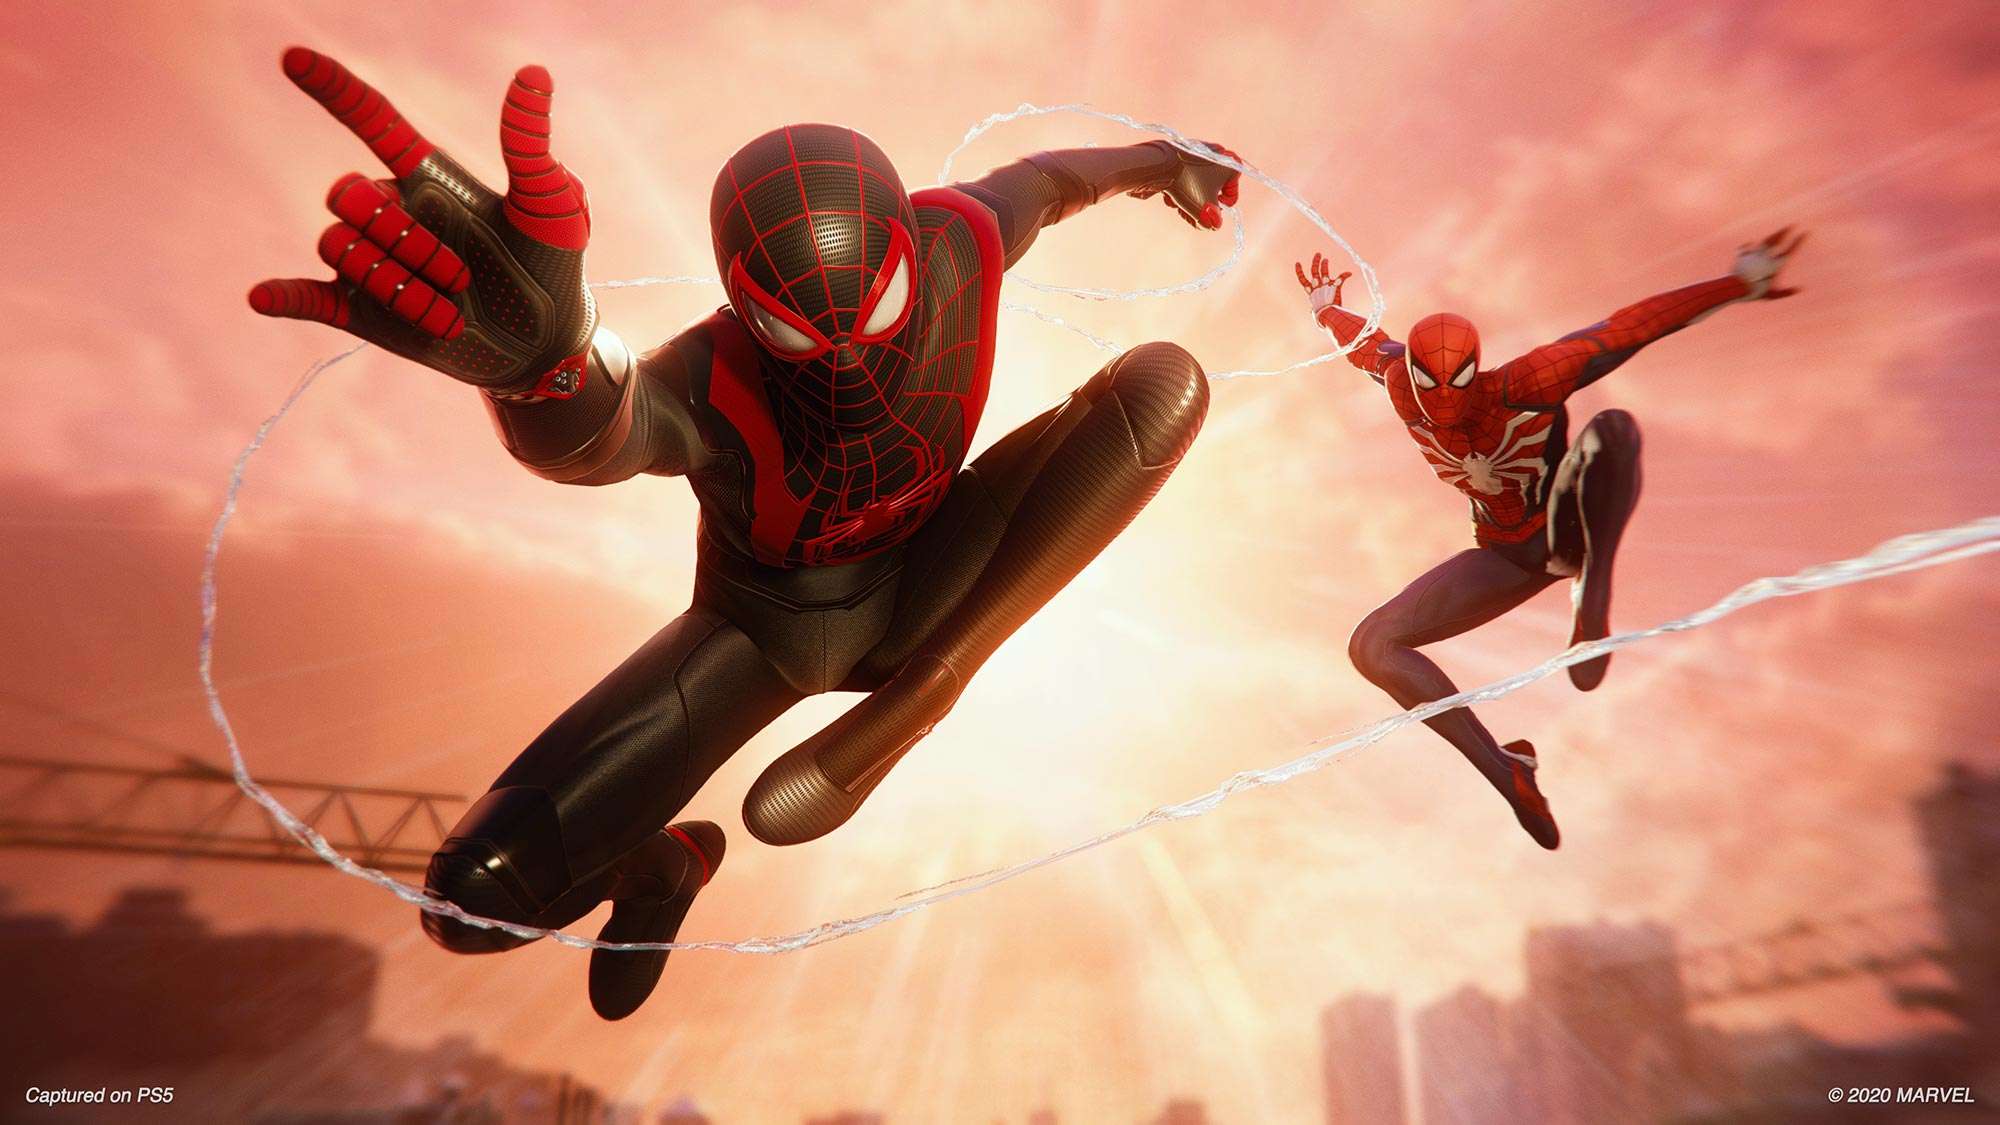 Spider-Man 2 feels like the first true PlayStation 5 game